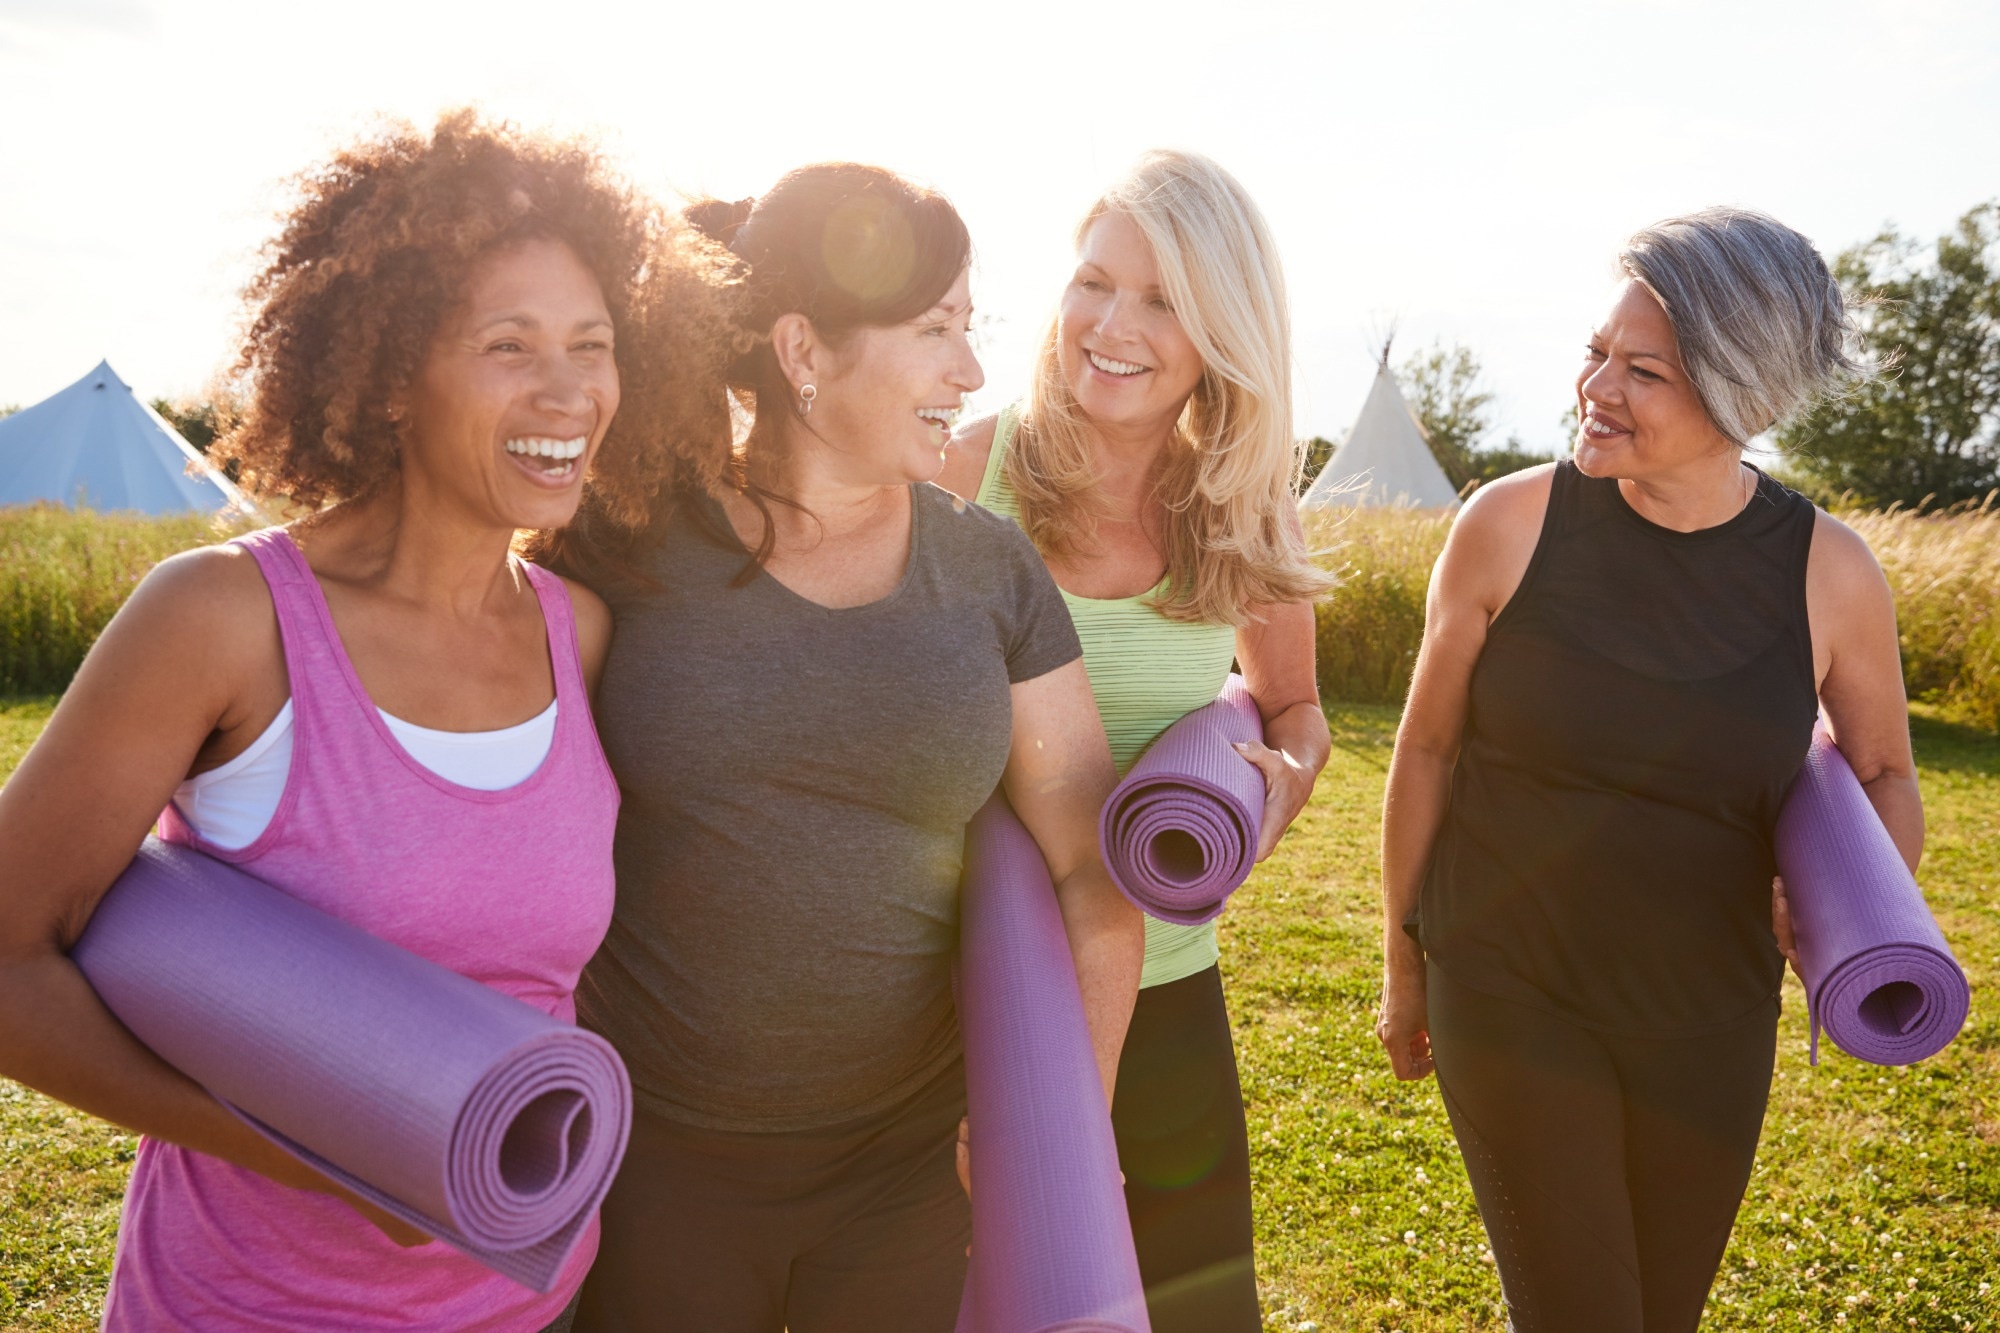 Study: Physical and Behavioral Factors Associated With Improvement in Physical Health and Function Among US Women During Midlife. Image Credit: MonkeyBusinessImages/Shutterstock.com